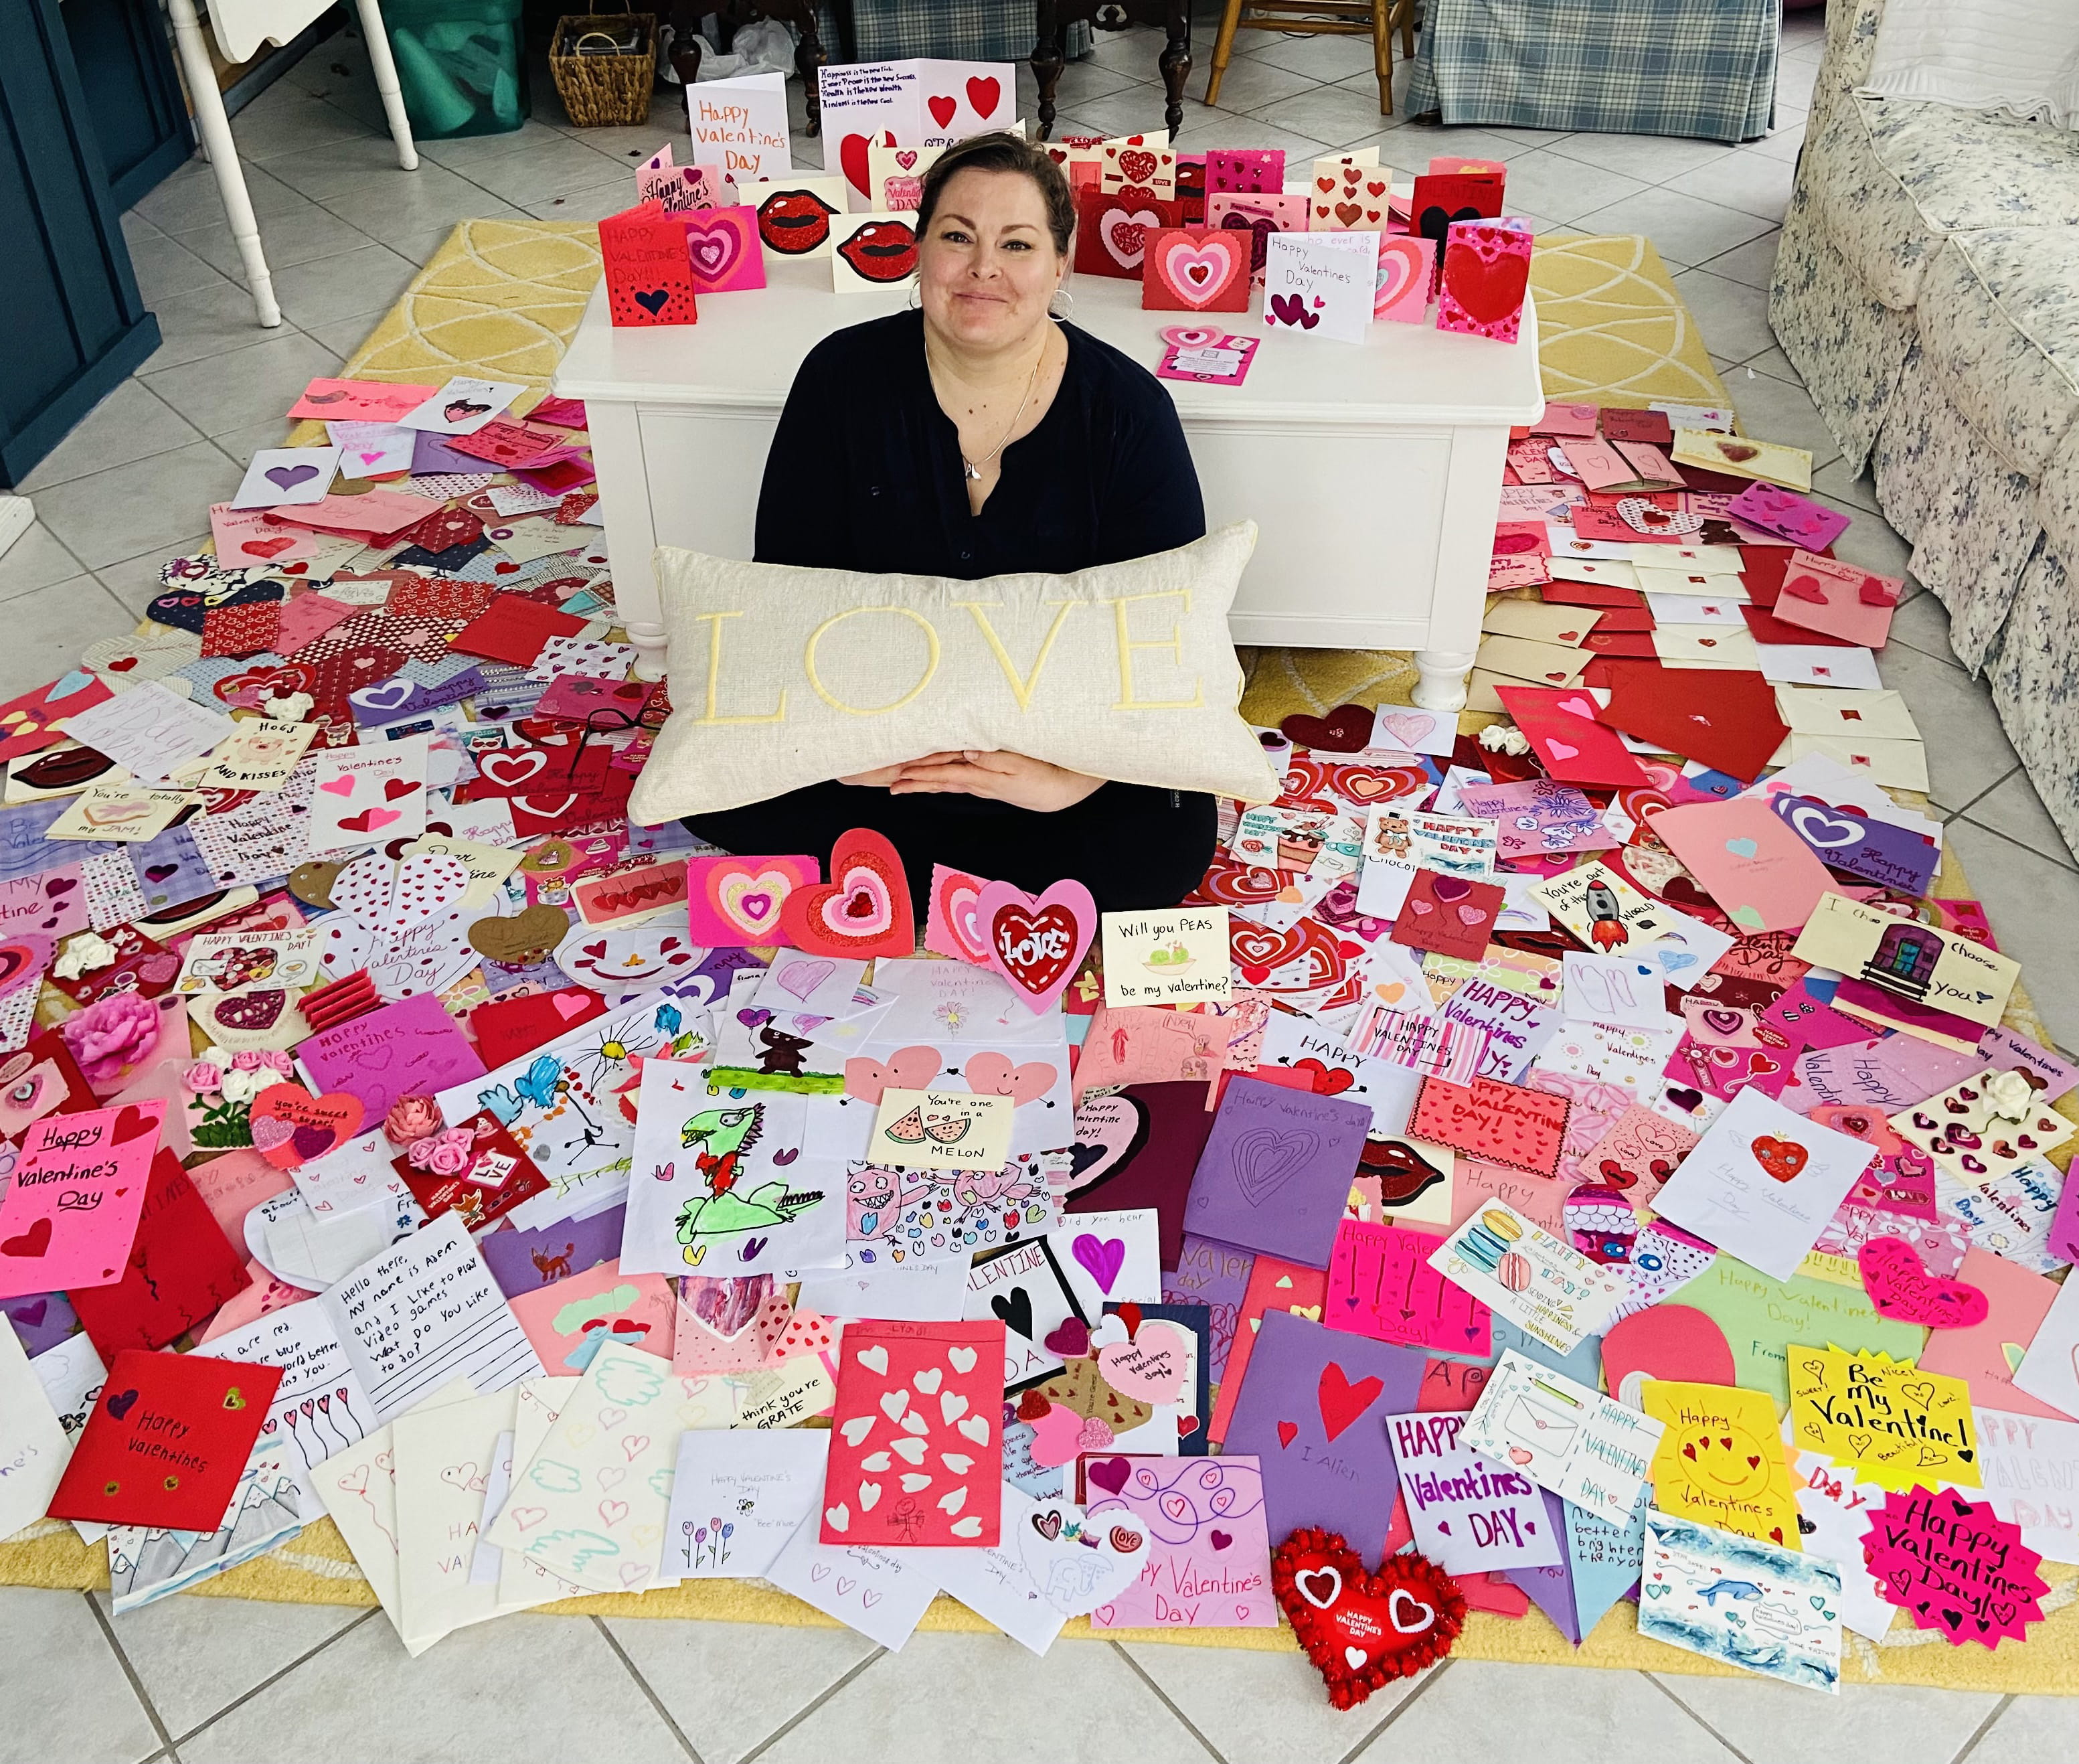 Amy Saccomano surrounded by hand-made Valentine's Day cards